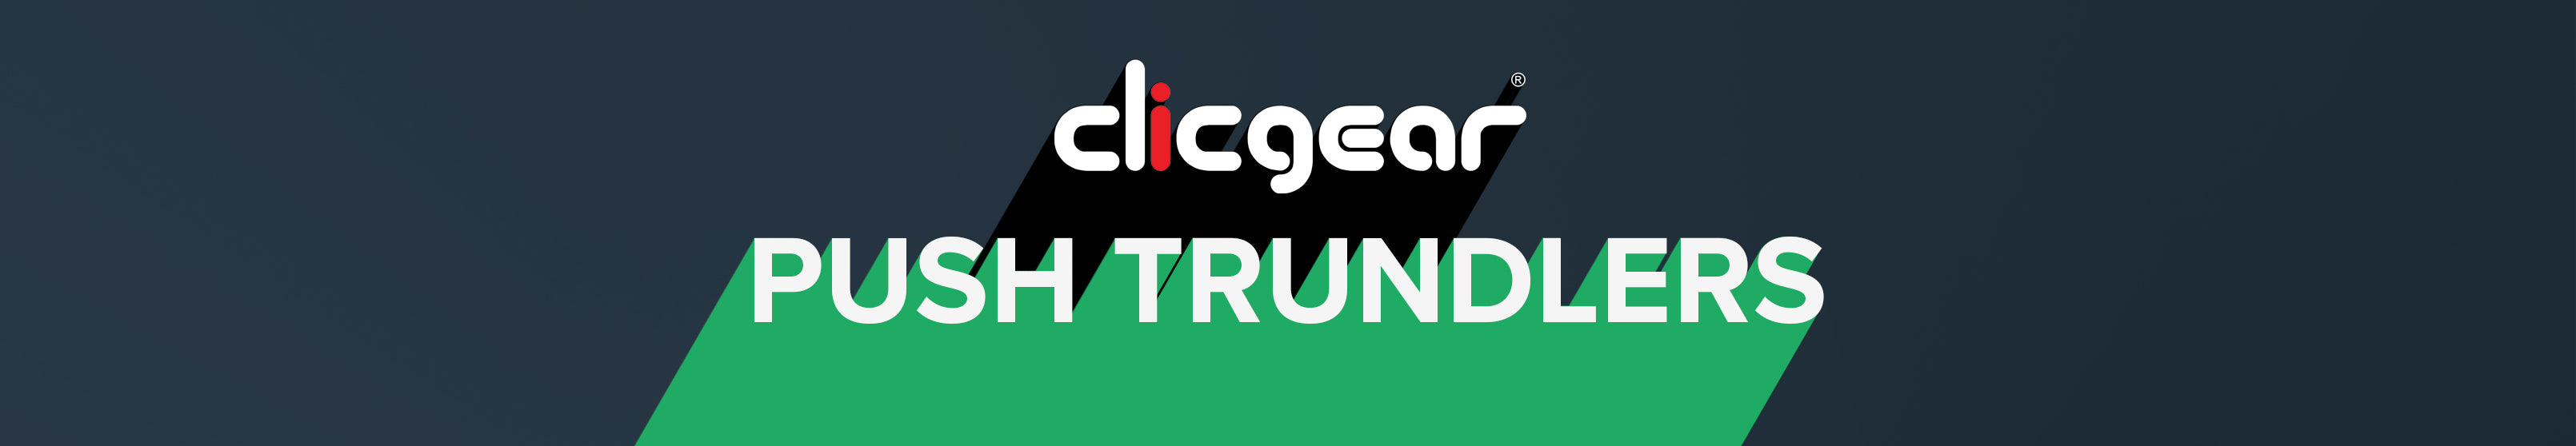 Clicgear Trundlers